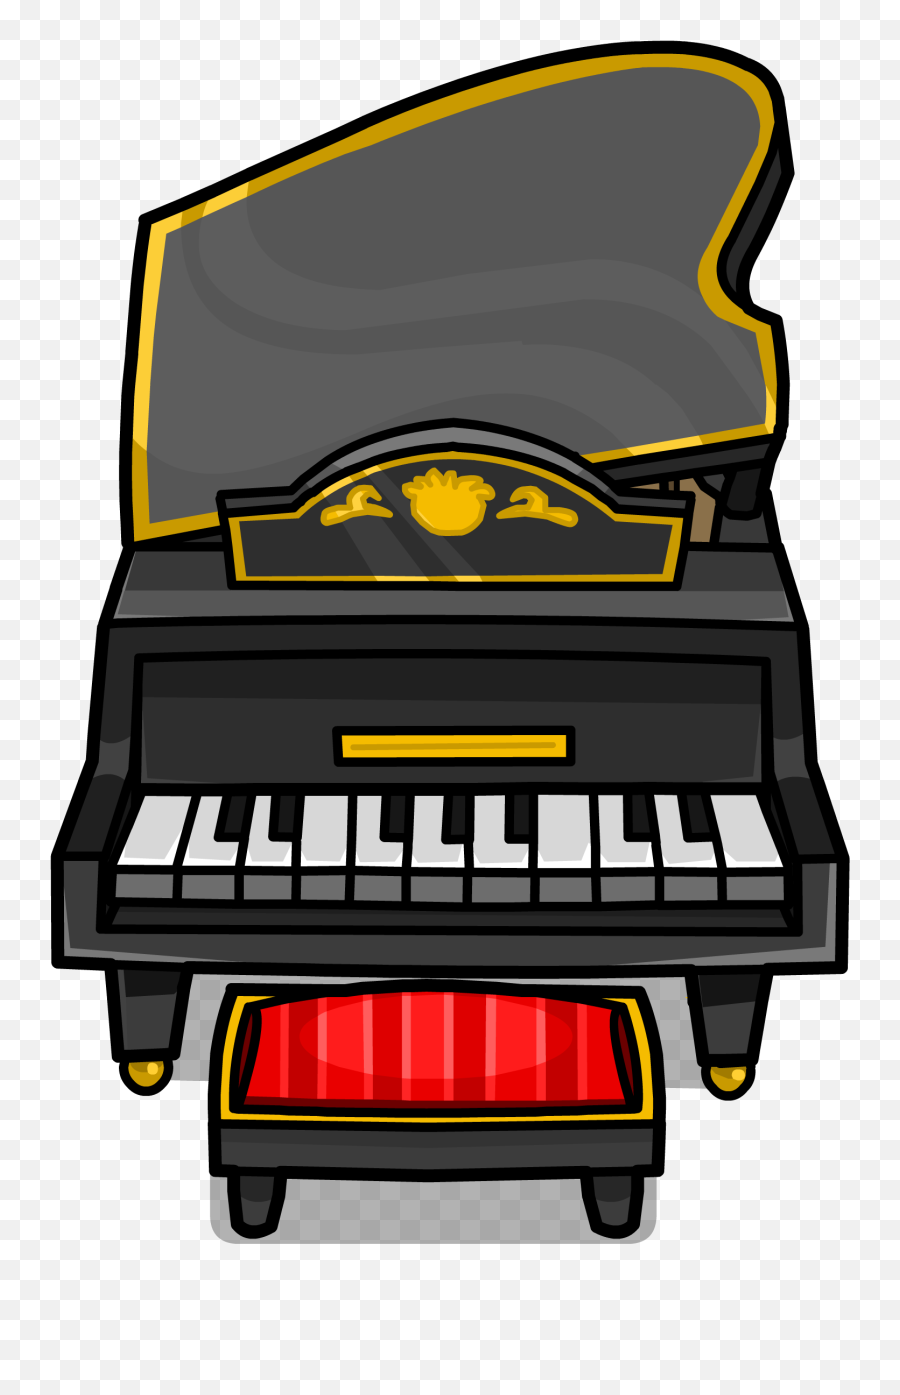 Grand Piano Sprite 001 - Piano Sprite Png,Grand Piano Png